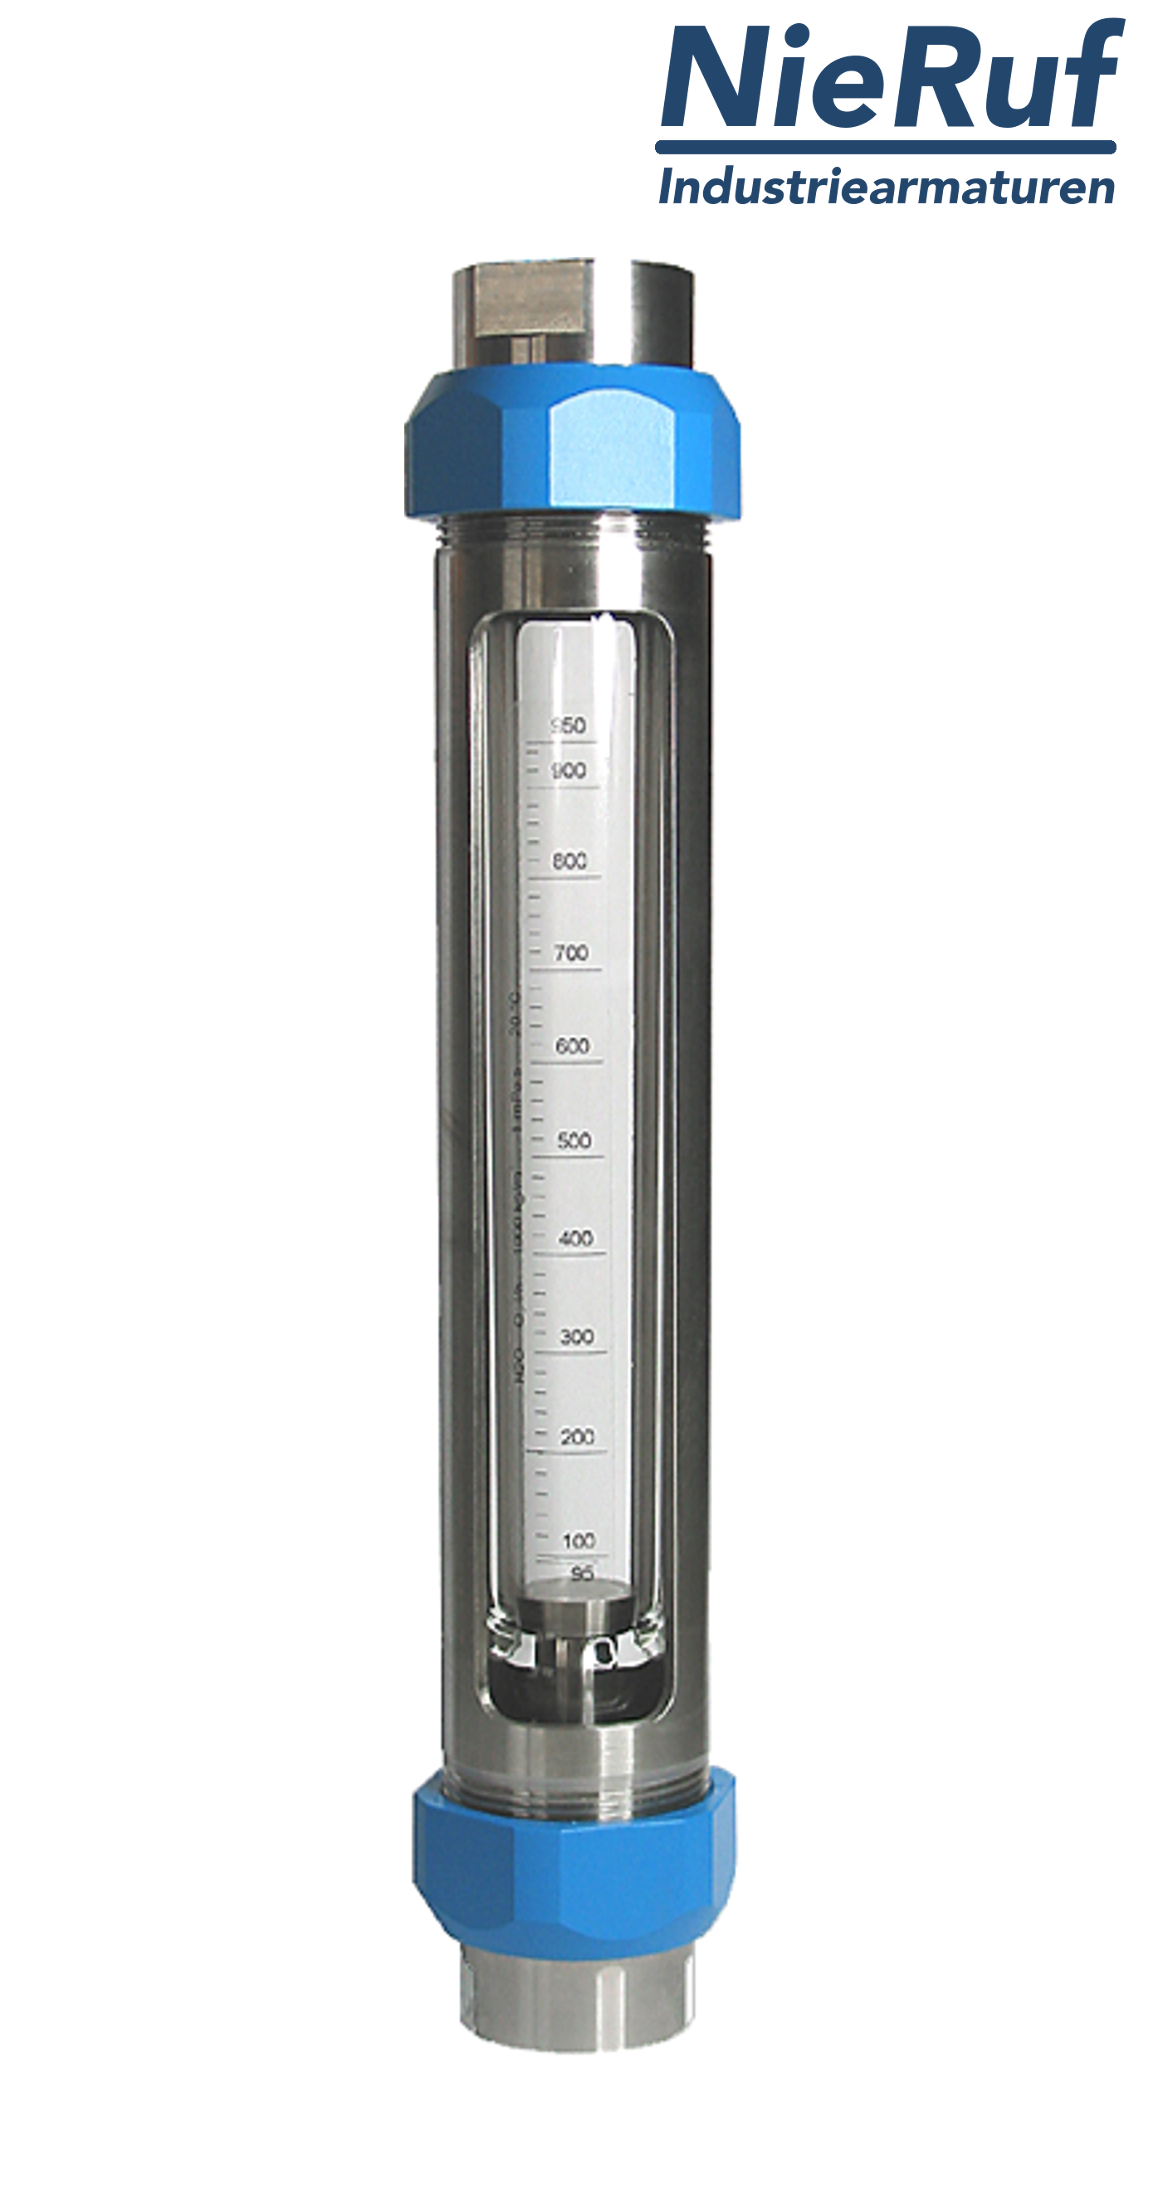 Variable area flowmeter stainless steel + borosilicate 1/2" inch 1.0 - 10.0 l/h water EPDM